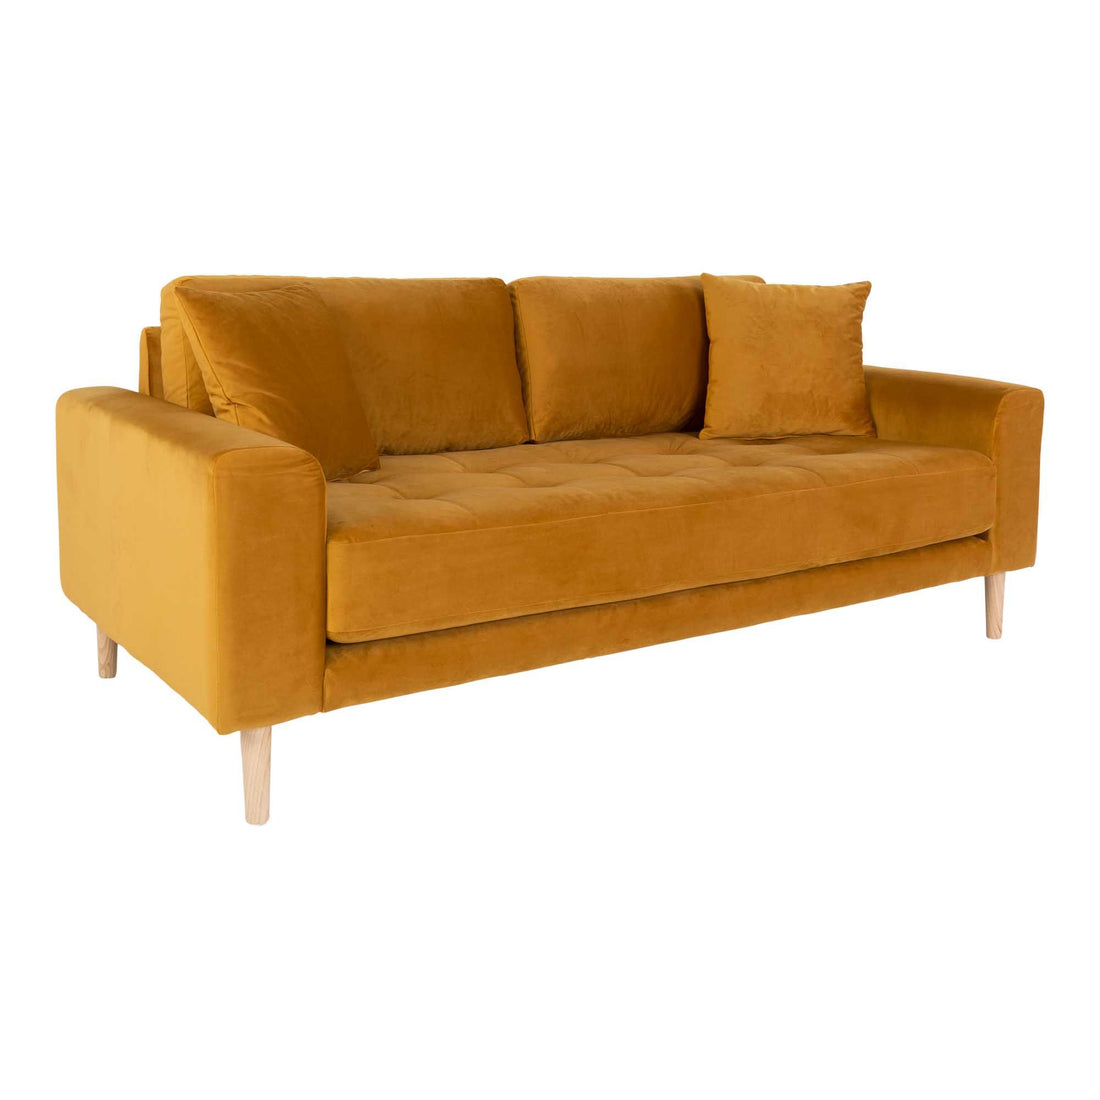 Lido 2.5 -person sofa - 2.5 -person sofa in velor, mustard yellow with two pillows and nature wooden legs, HN1004 - 1 - pcs